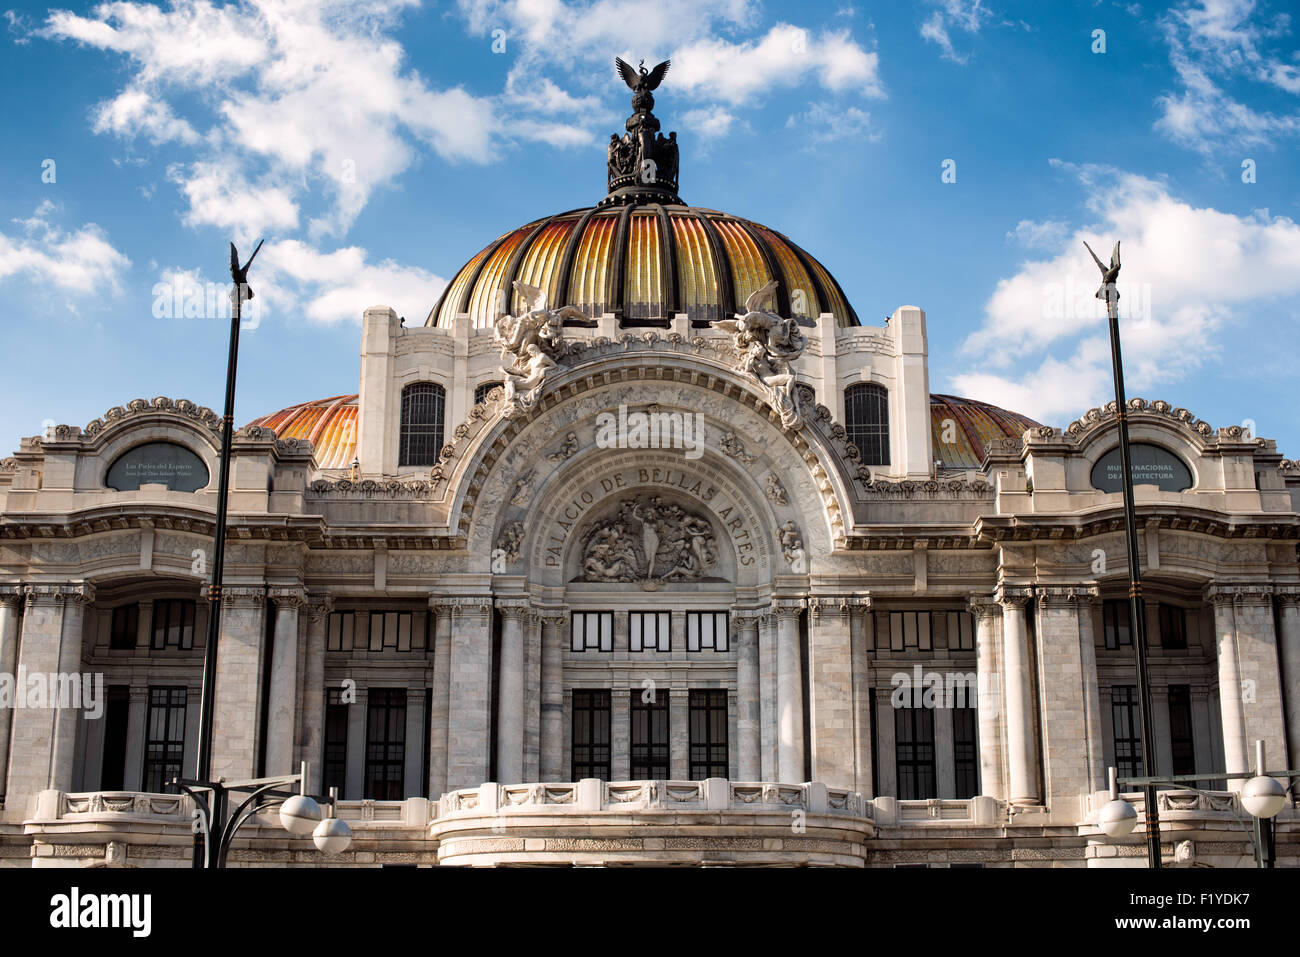 MEXICO CITY, Mexico — The Palacio de Bellas Artes (Palace of Fine Arts) is Mexico's most important cultural center. It's located on the end of Alameda Central park close to the Zocalo in Centro Historico. The building was completed in 1934 and features a distinctive tiled roof on the domes. Stock Photo